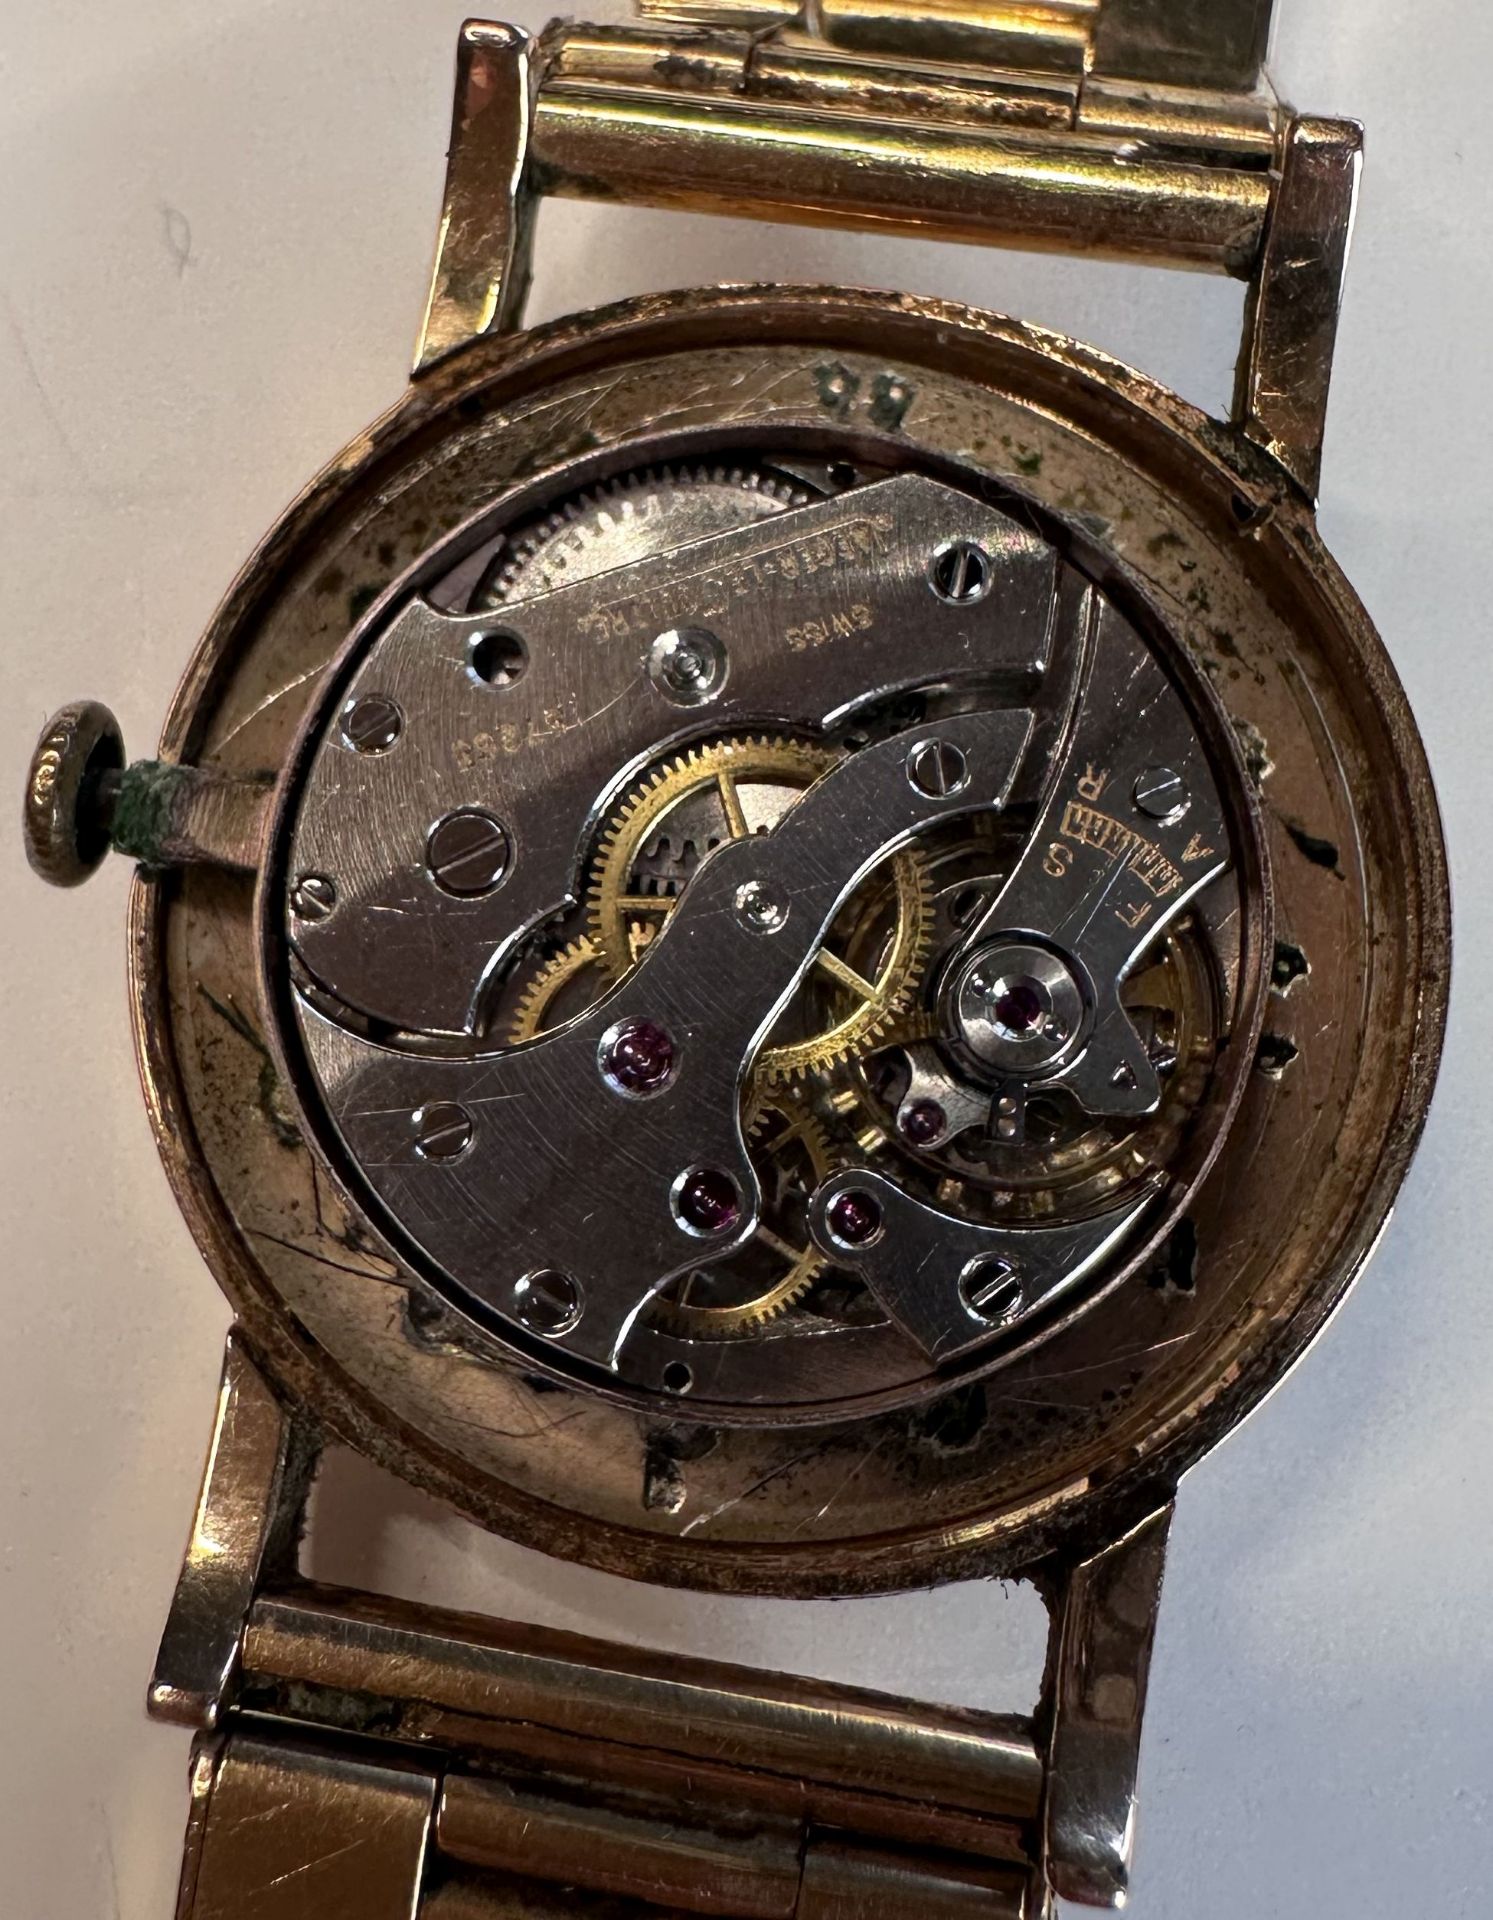 Jaeger LeCoultre: Wristwatch - Image 7 of 7